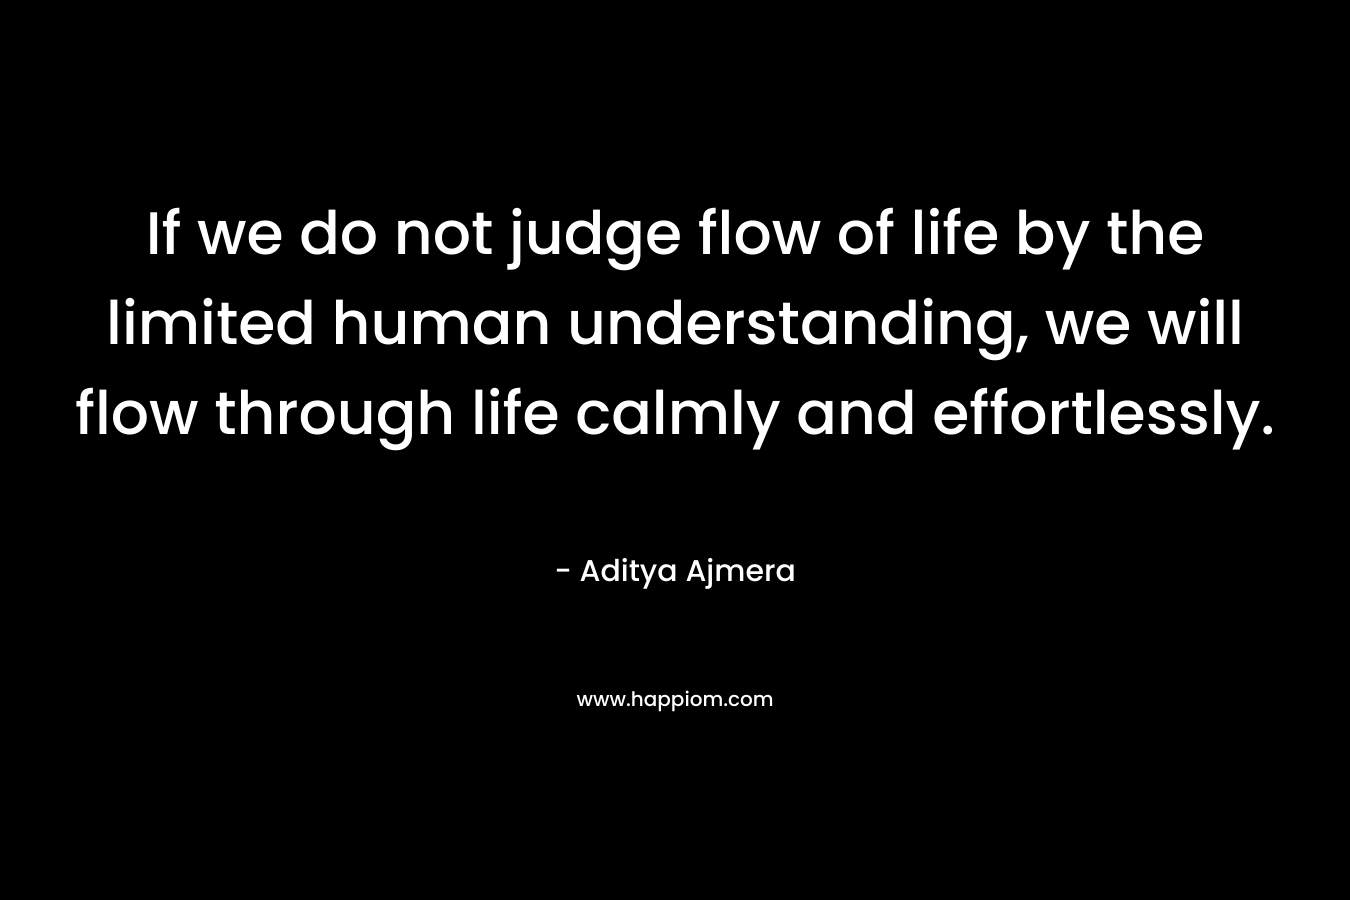 If we do not judge flow of life by the limited human understanding, we will flow through life calmly and effortlessly.